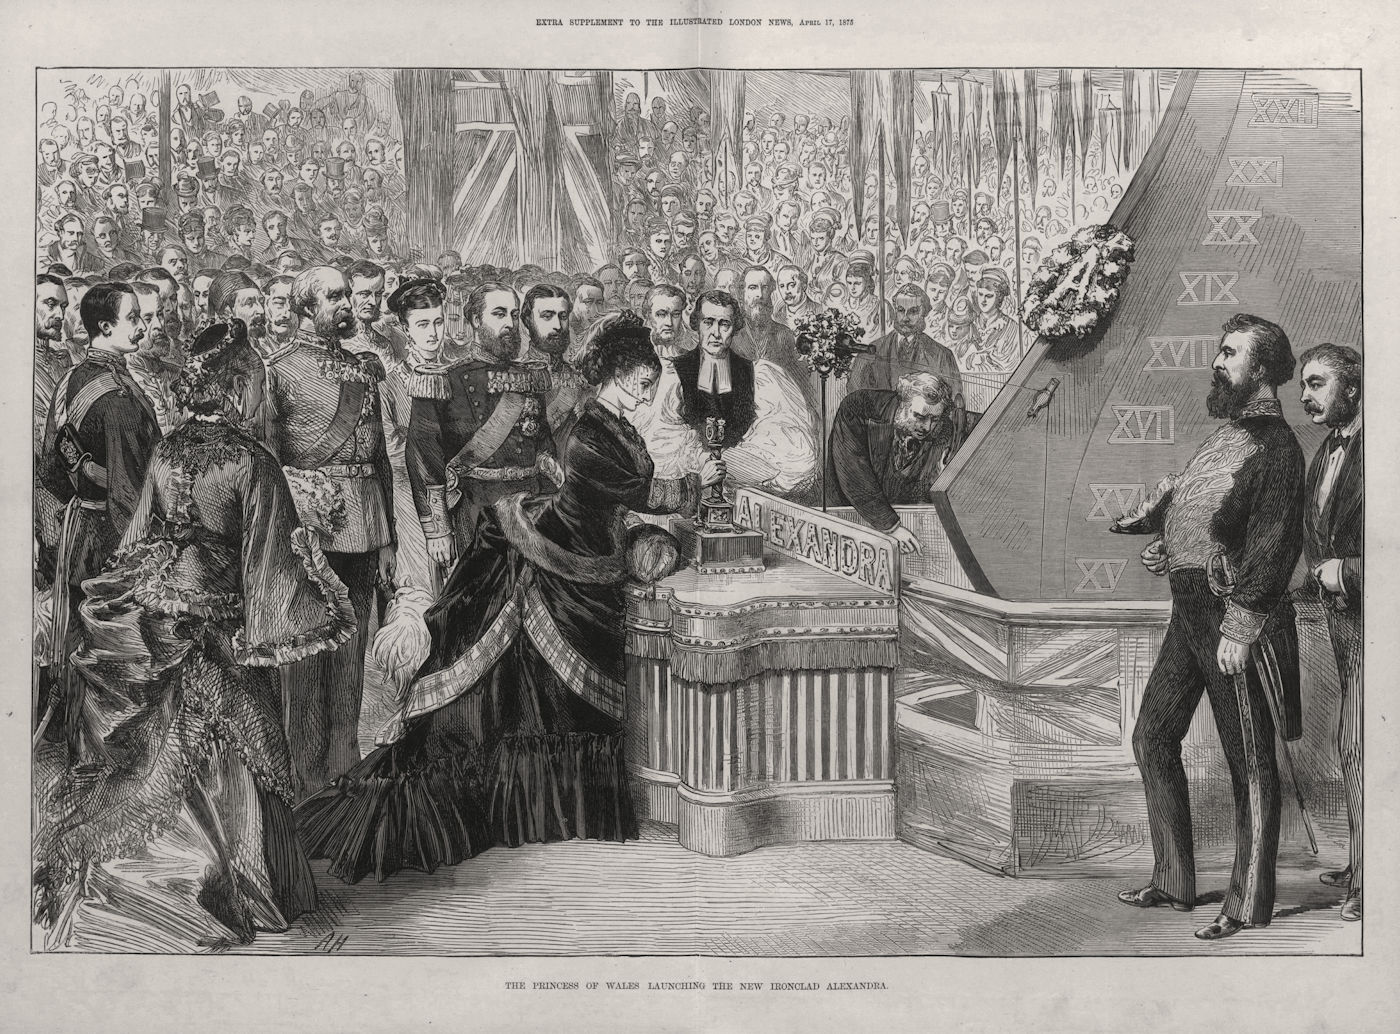 The Princess of Wales launching the new ironclad Alexandra. Chatham. Ships 1875